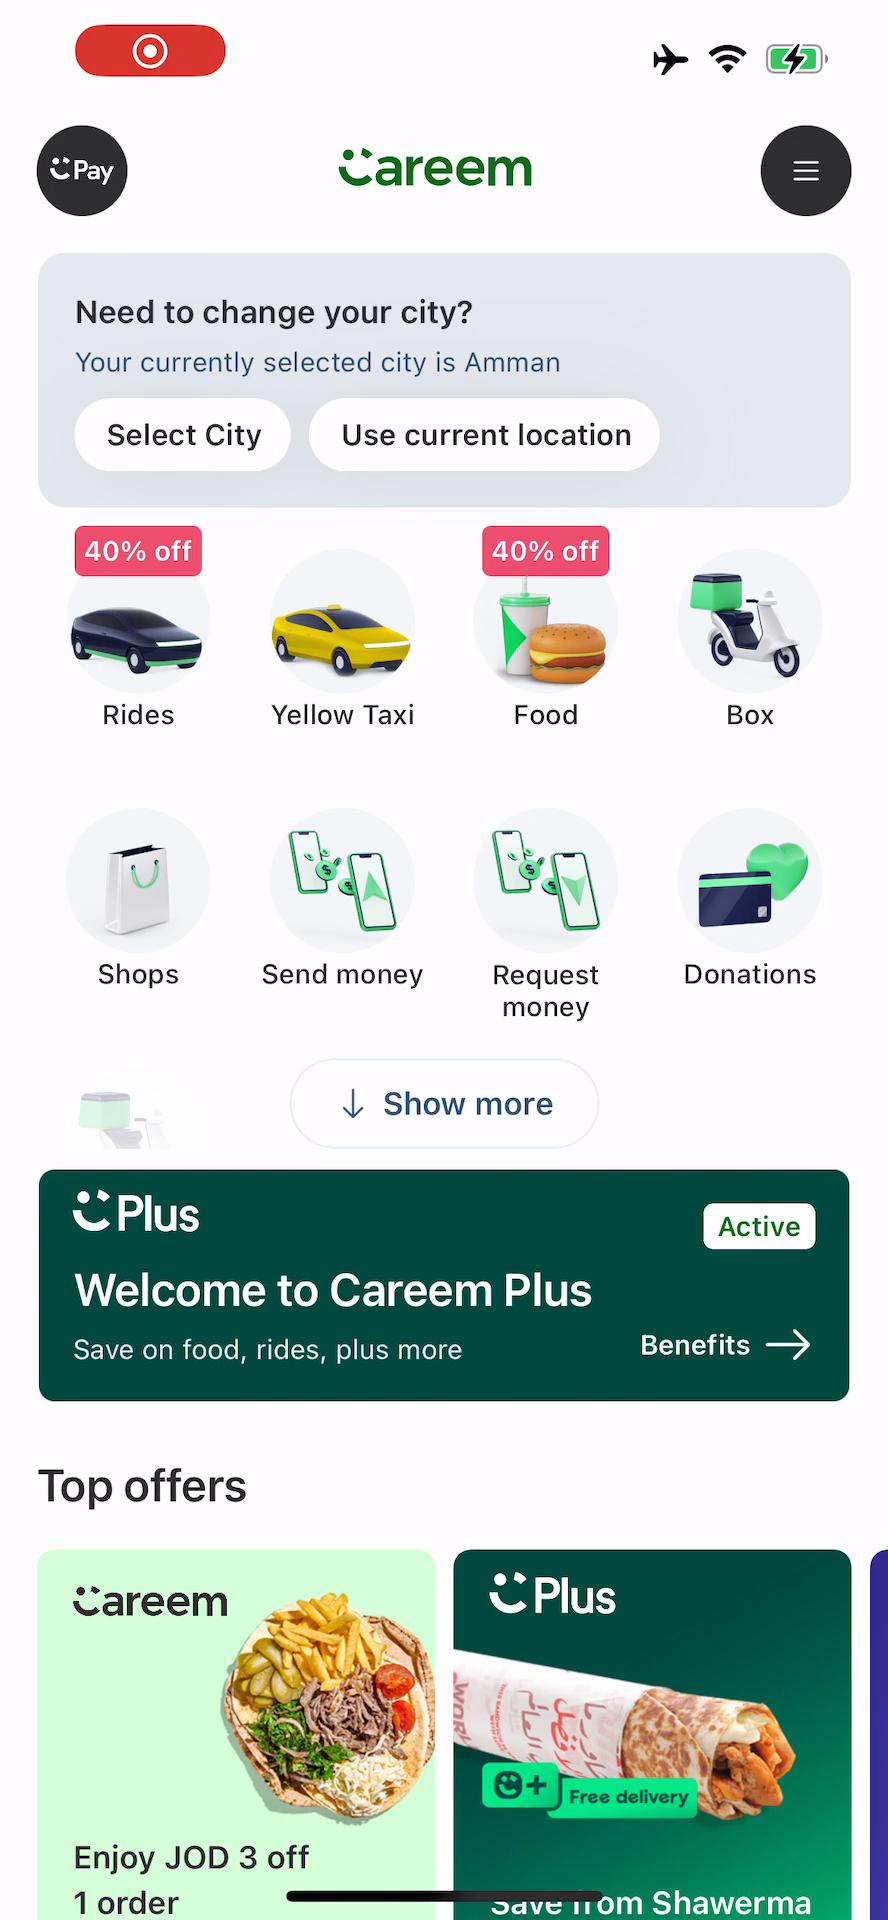 Cancelling your subscription on Careem video screenshot